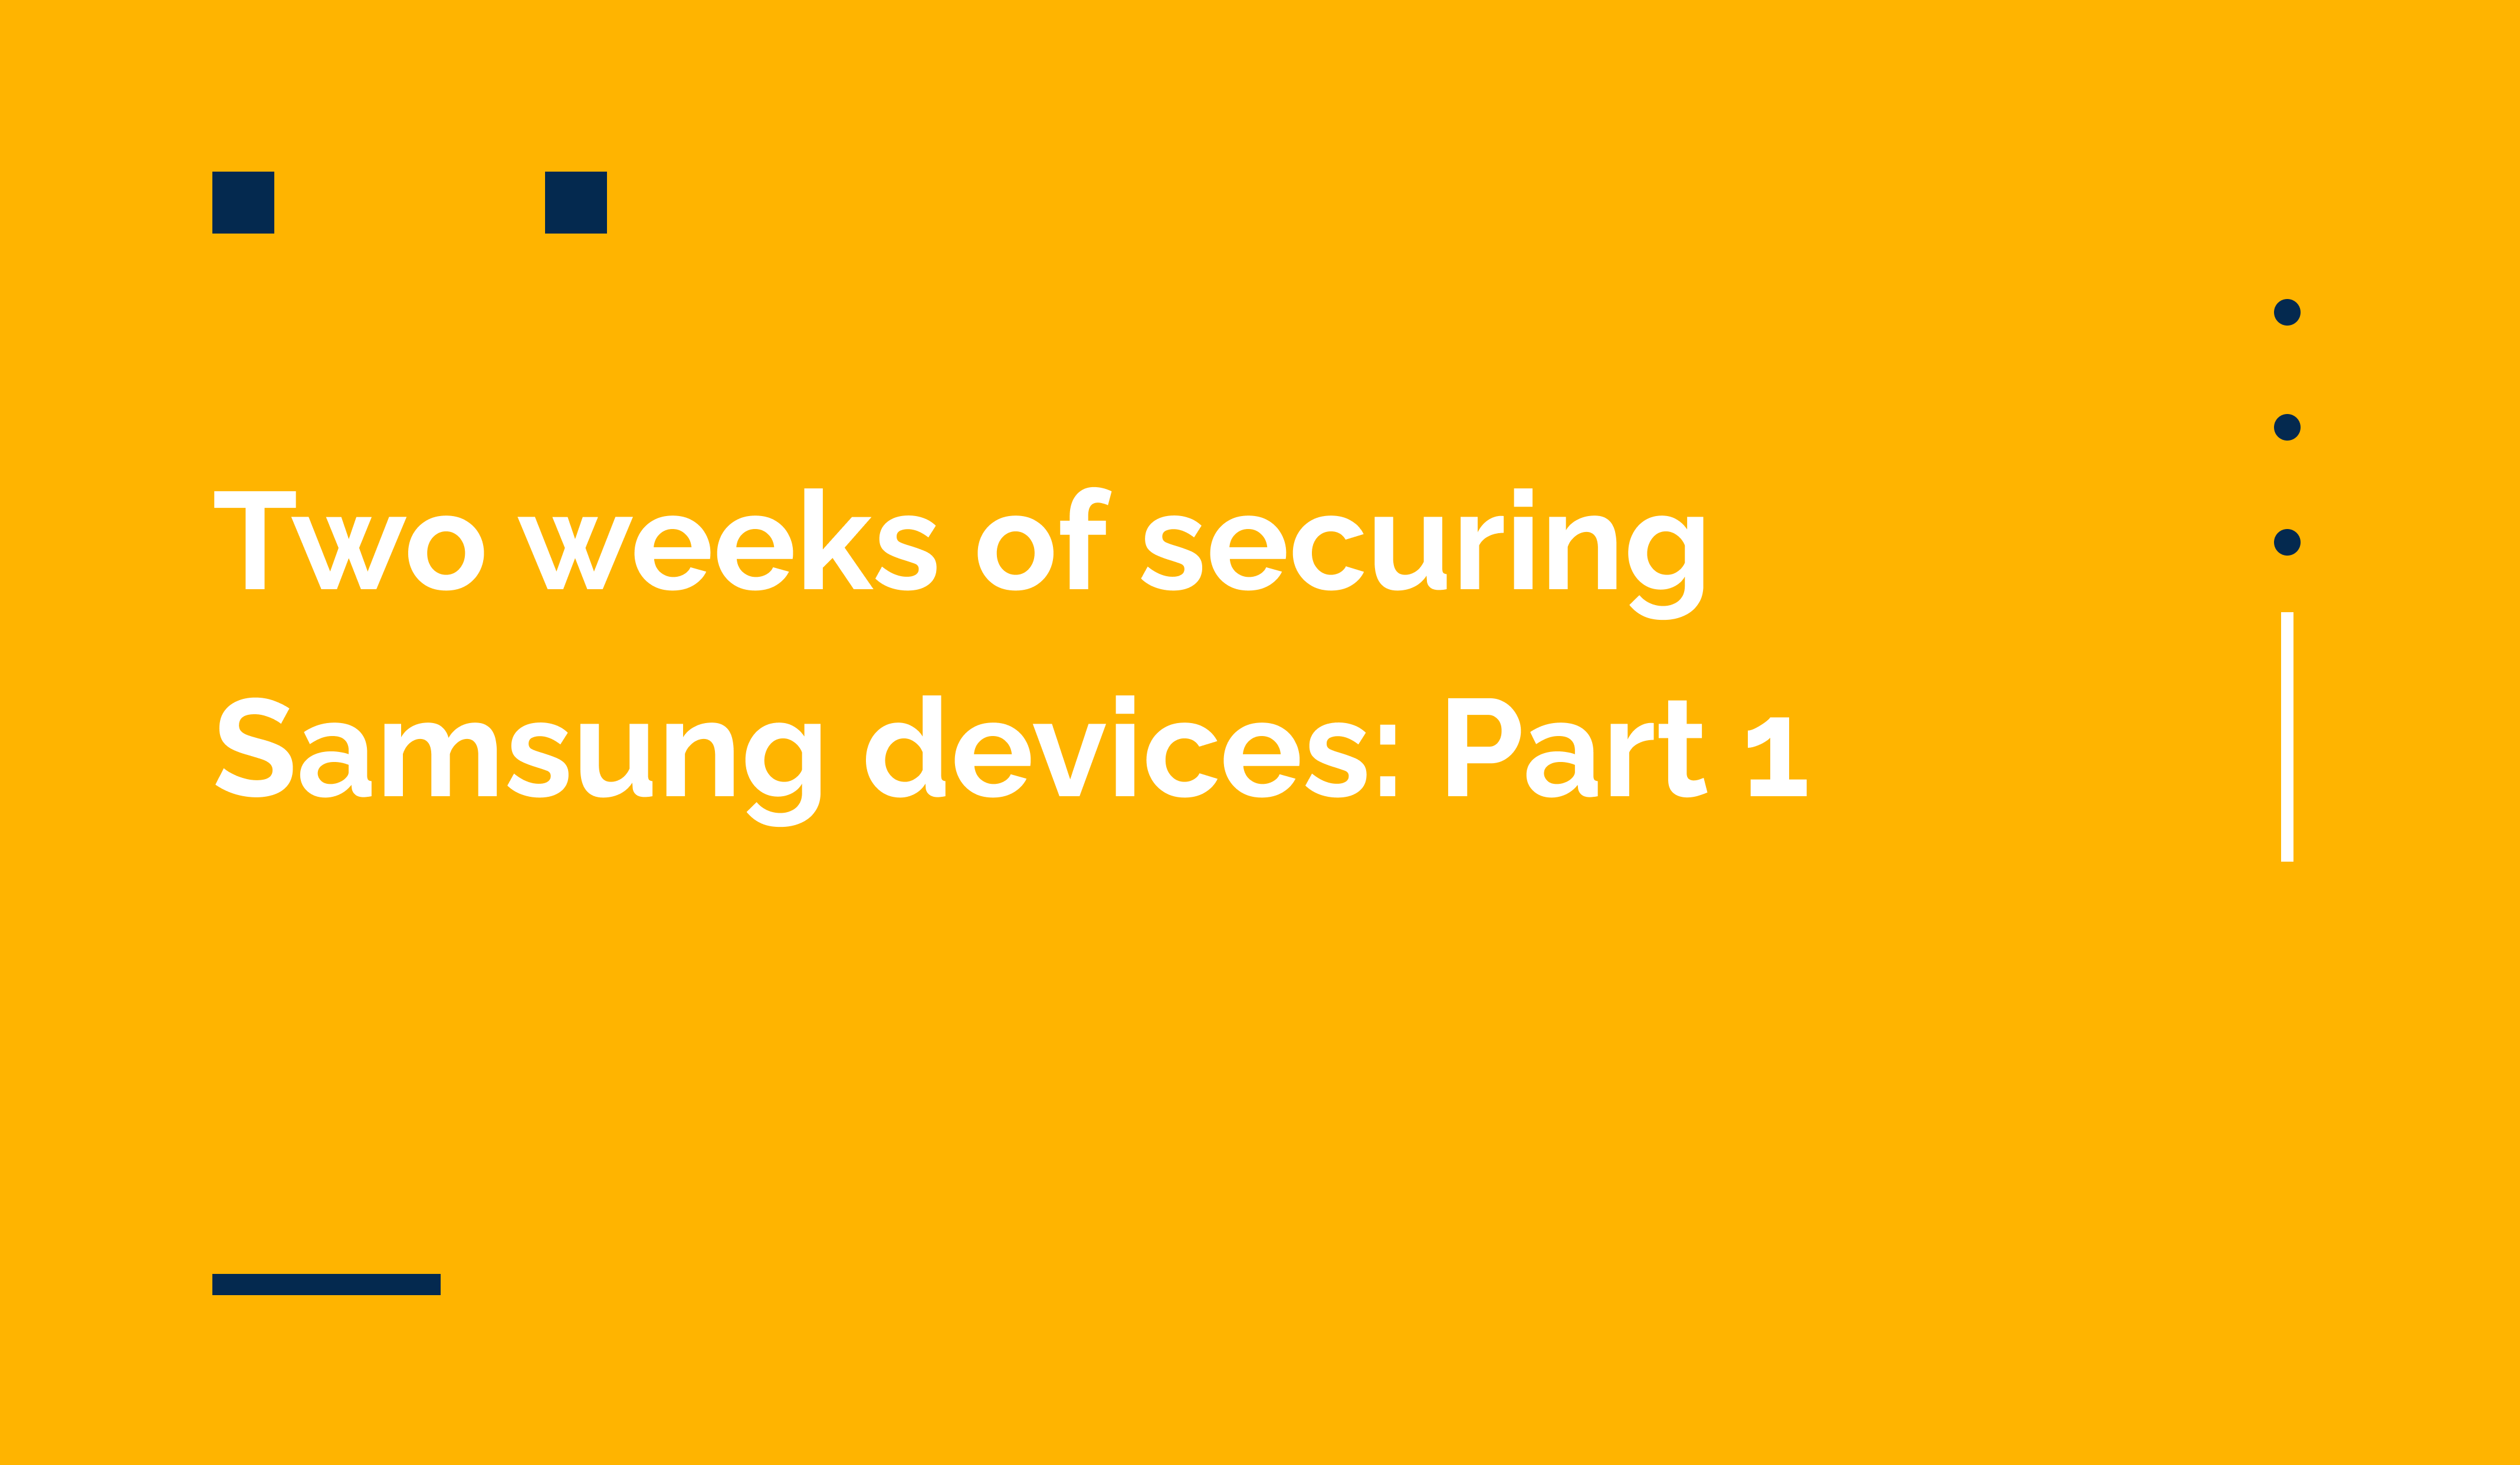 After spending two weeks looking for security bugs in the pre-installed apps on Samsung devices, we were able to find multiple dangerous vulnerabiliti